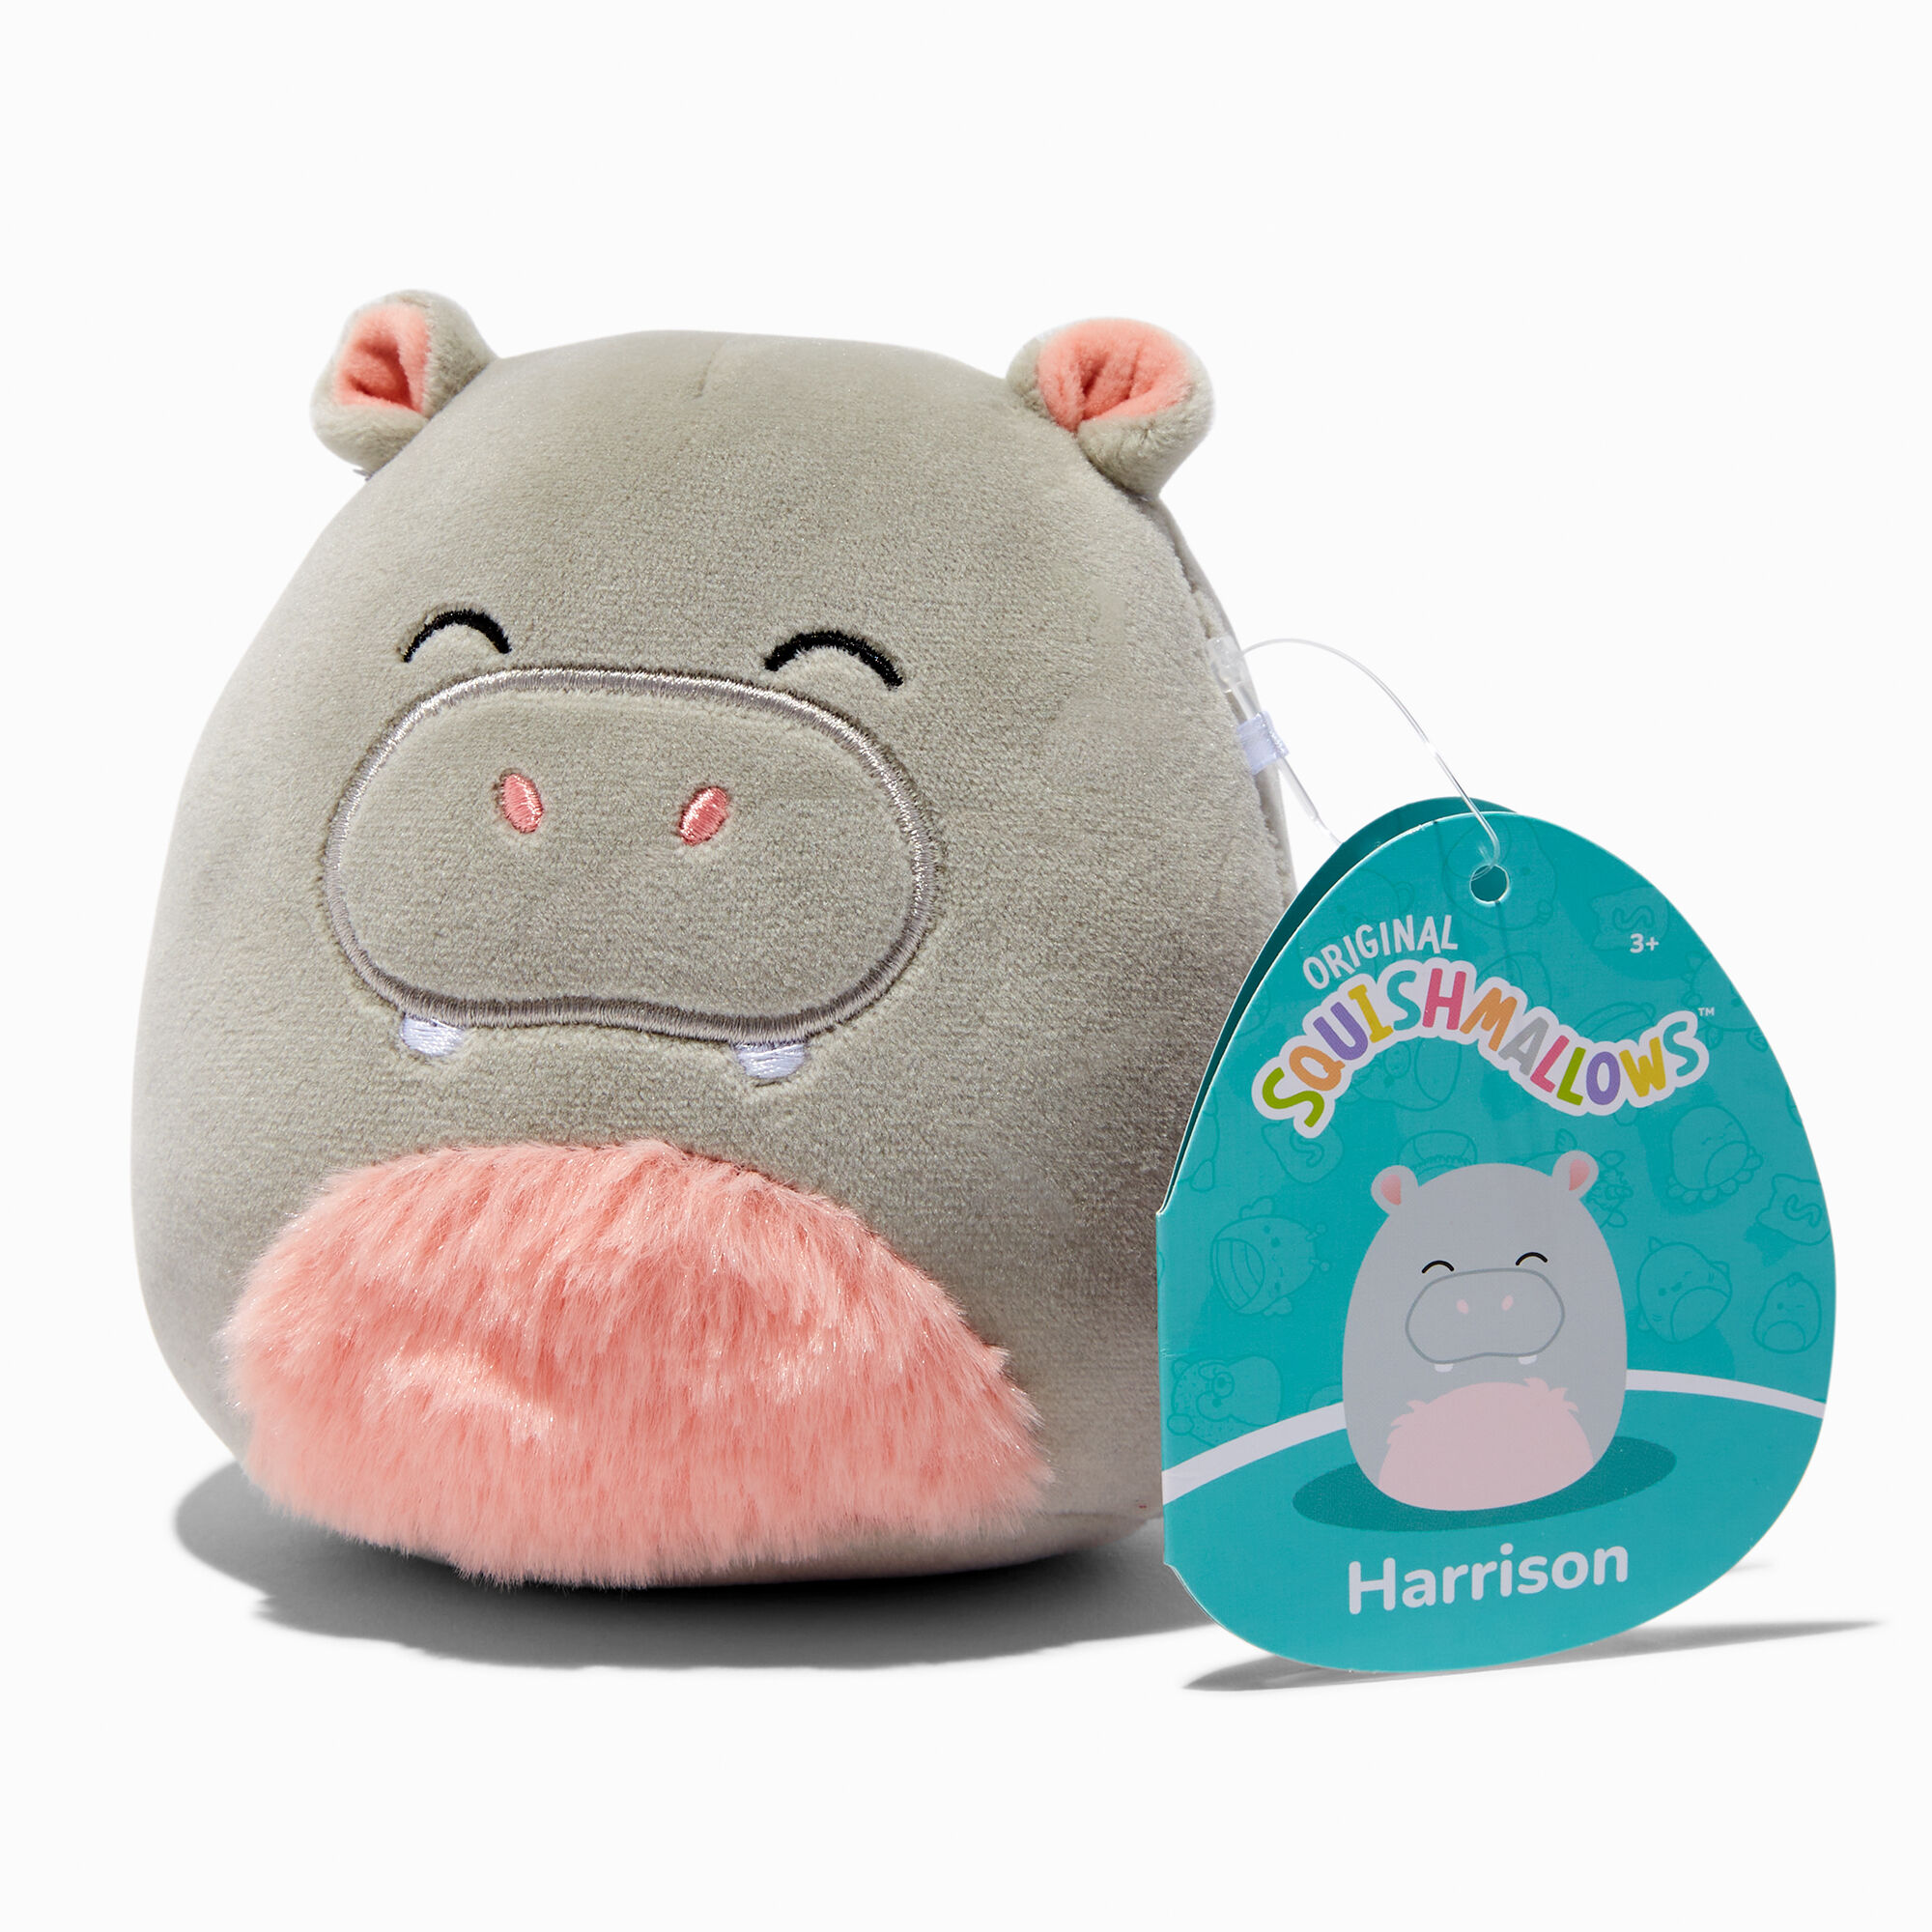 View Claires Squishmallows Online Exclusive 5 Harrison Soft Toy information